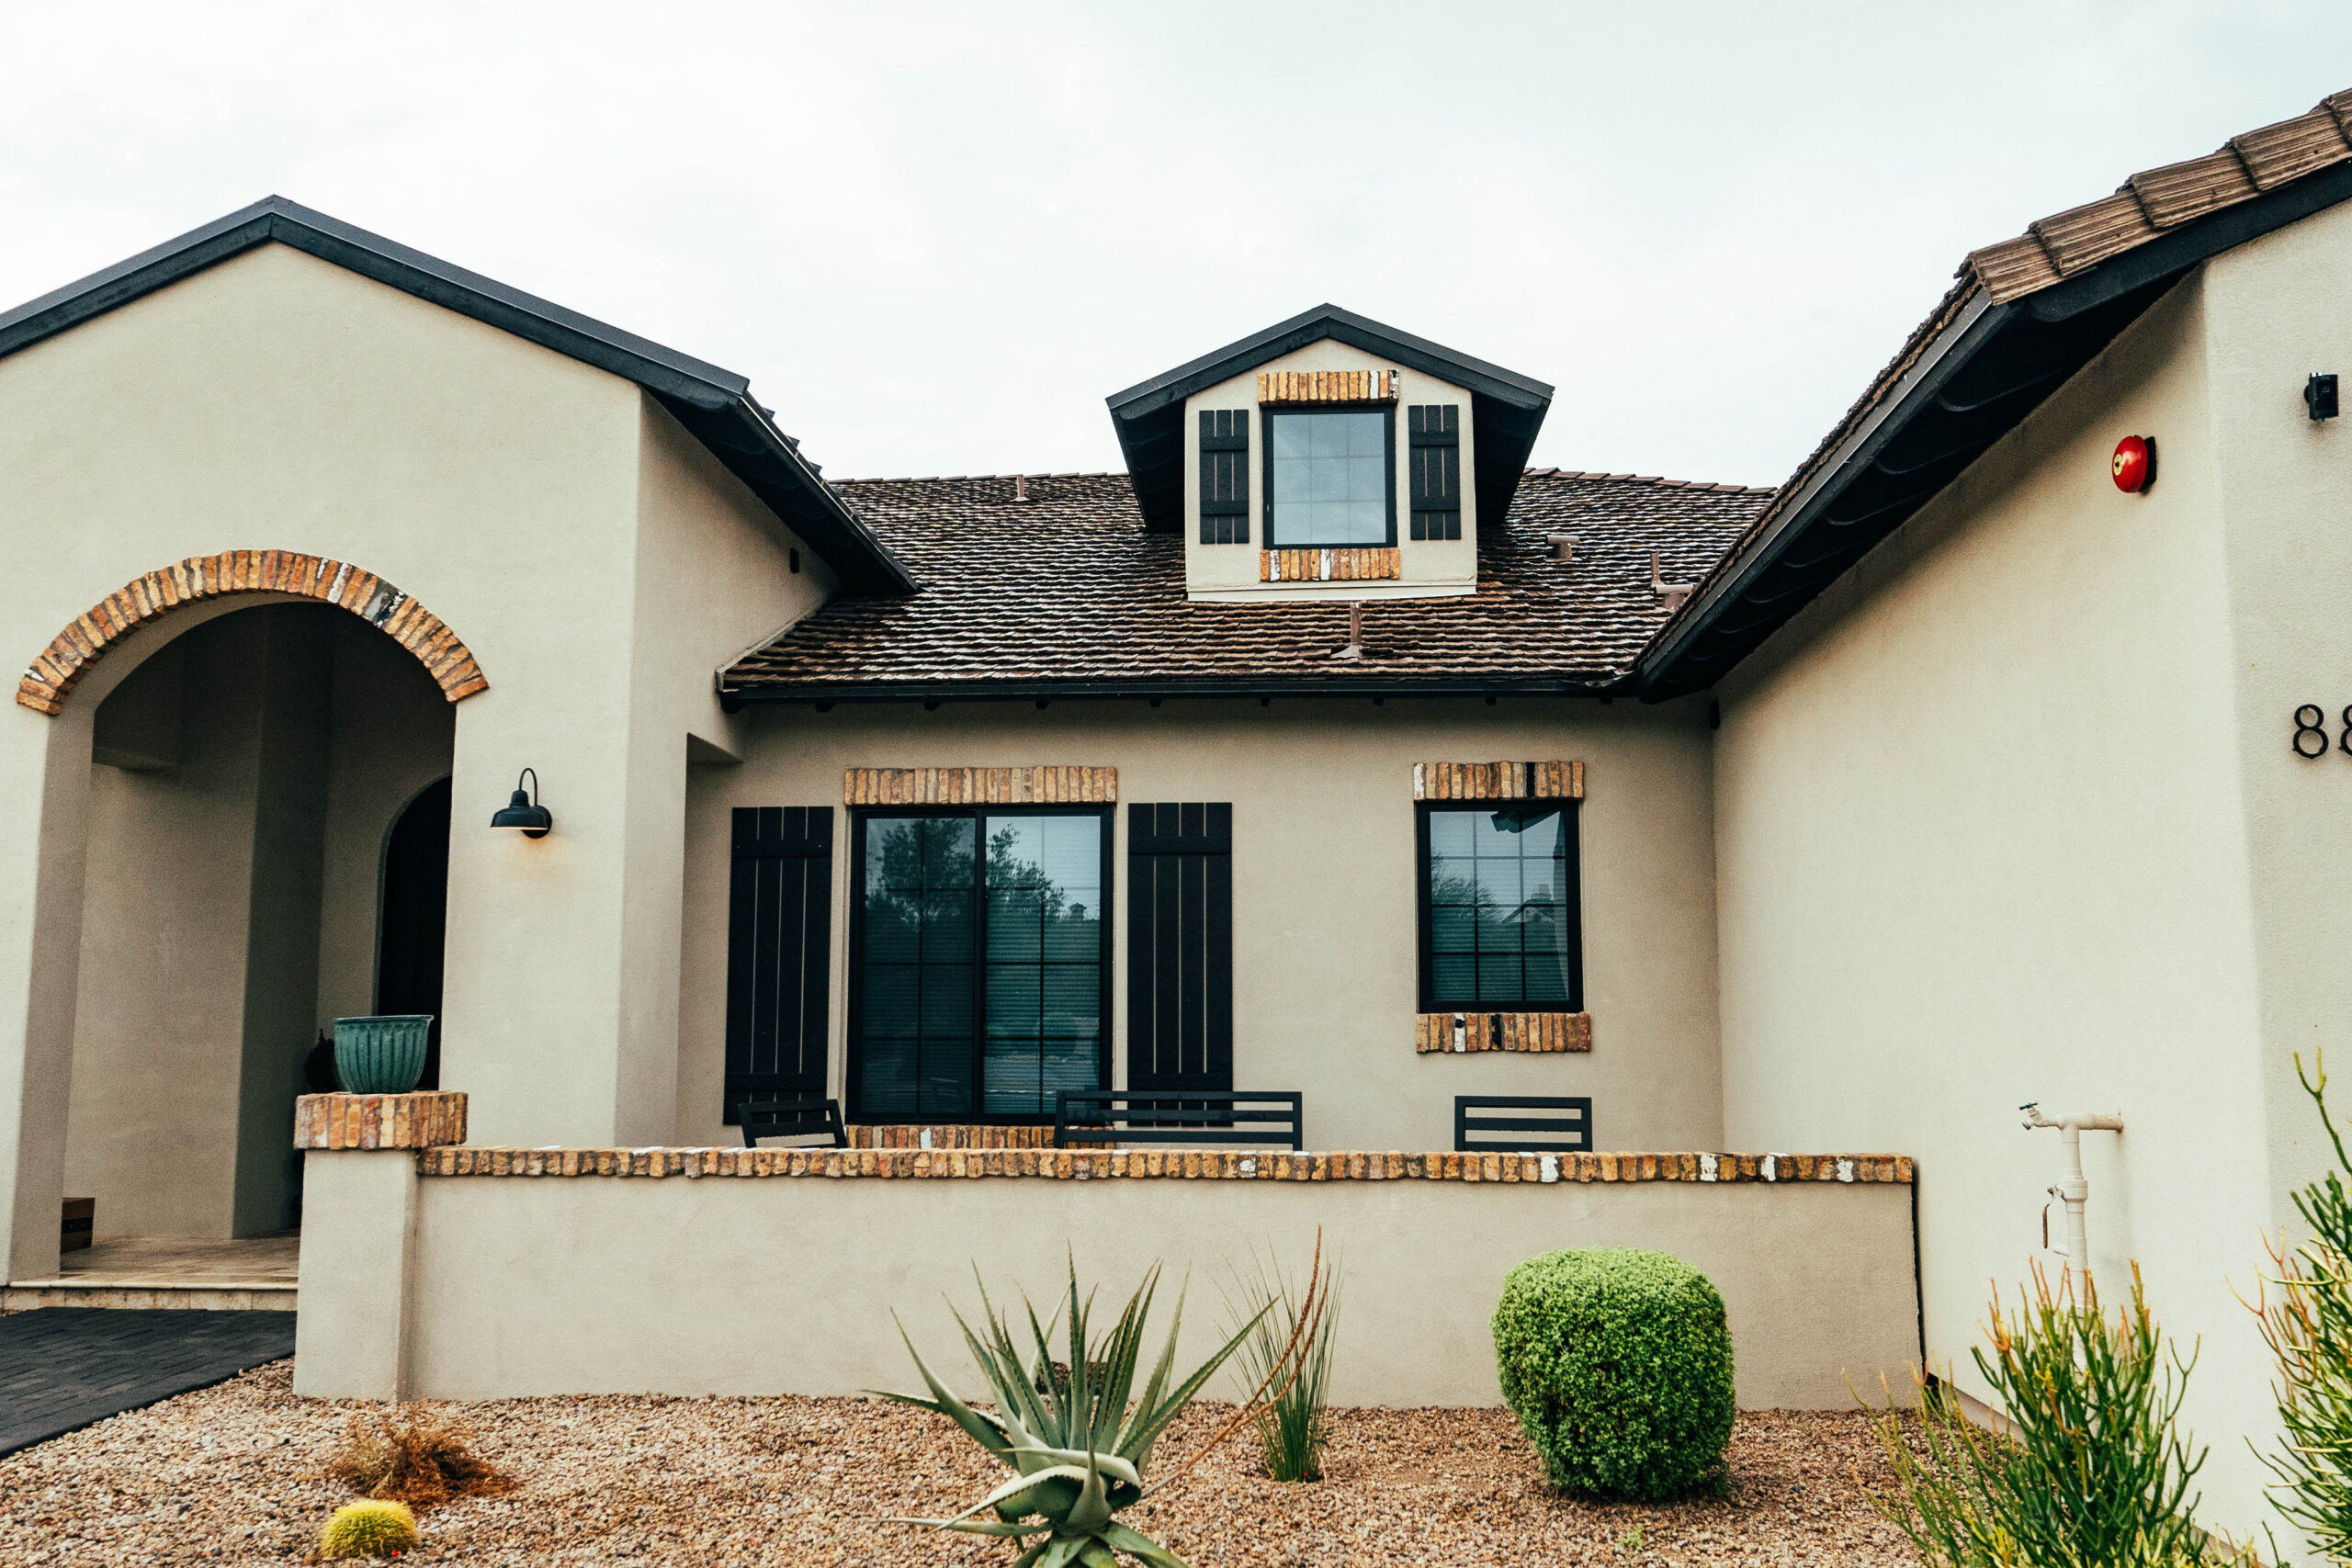 A house with a tile roof installation and a cactus in the front yard in North Phoenix.